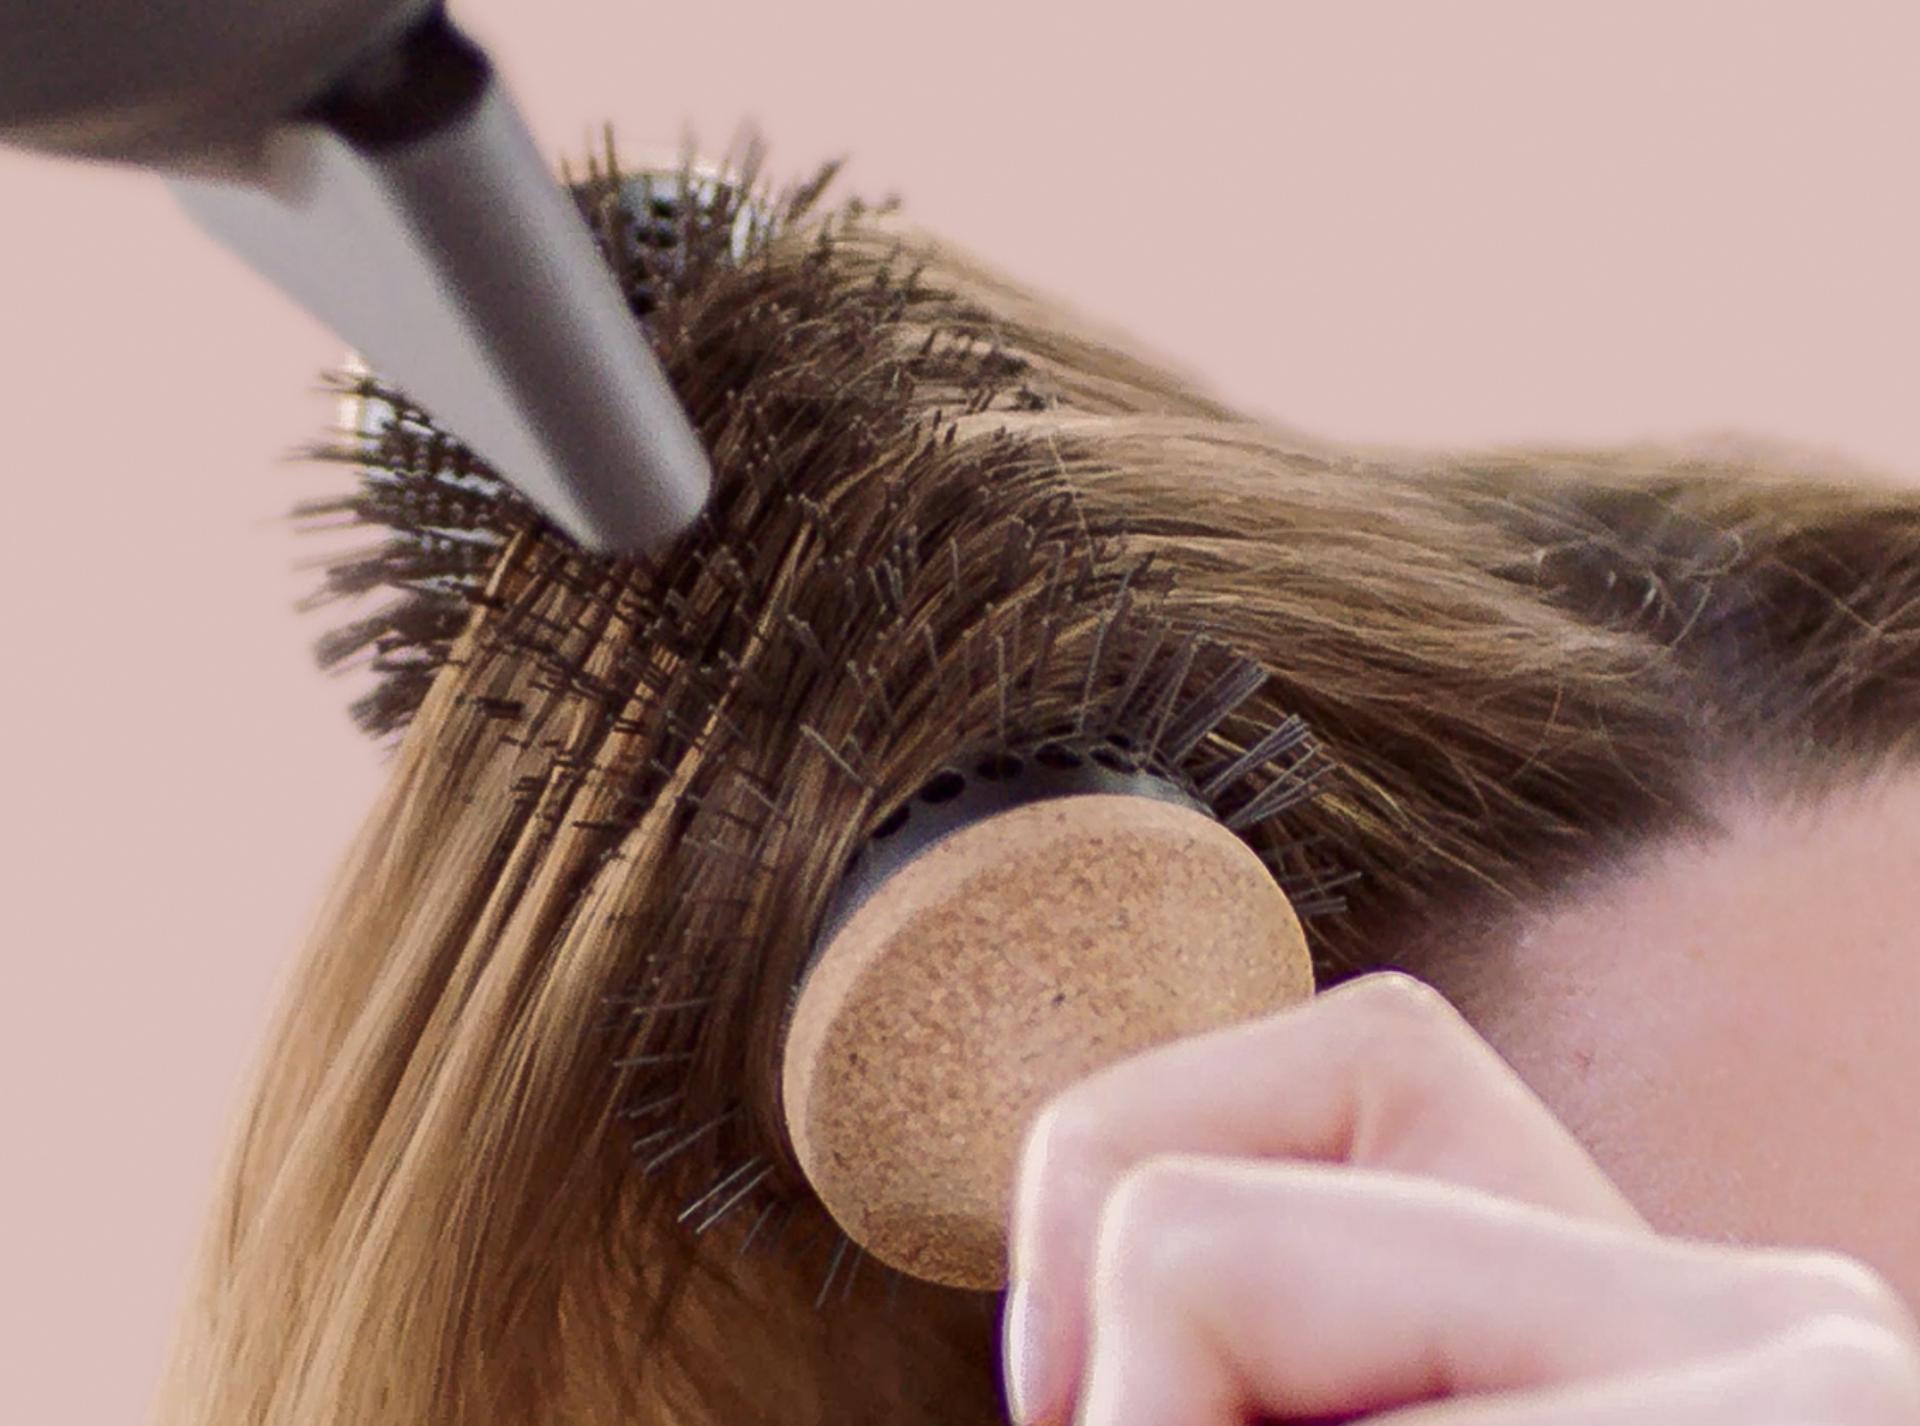 The Dyson Vented Barrel brush being used when drying the hair with the Dyson Supersonic hair dryer